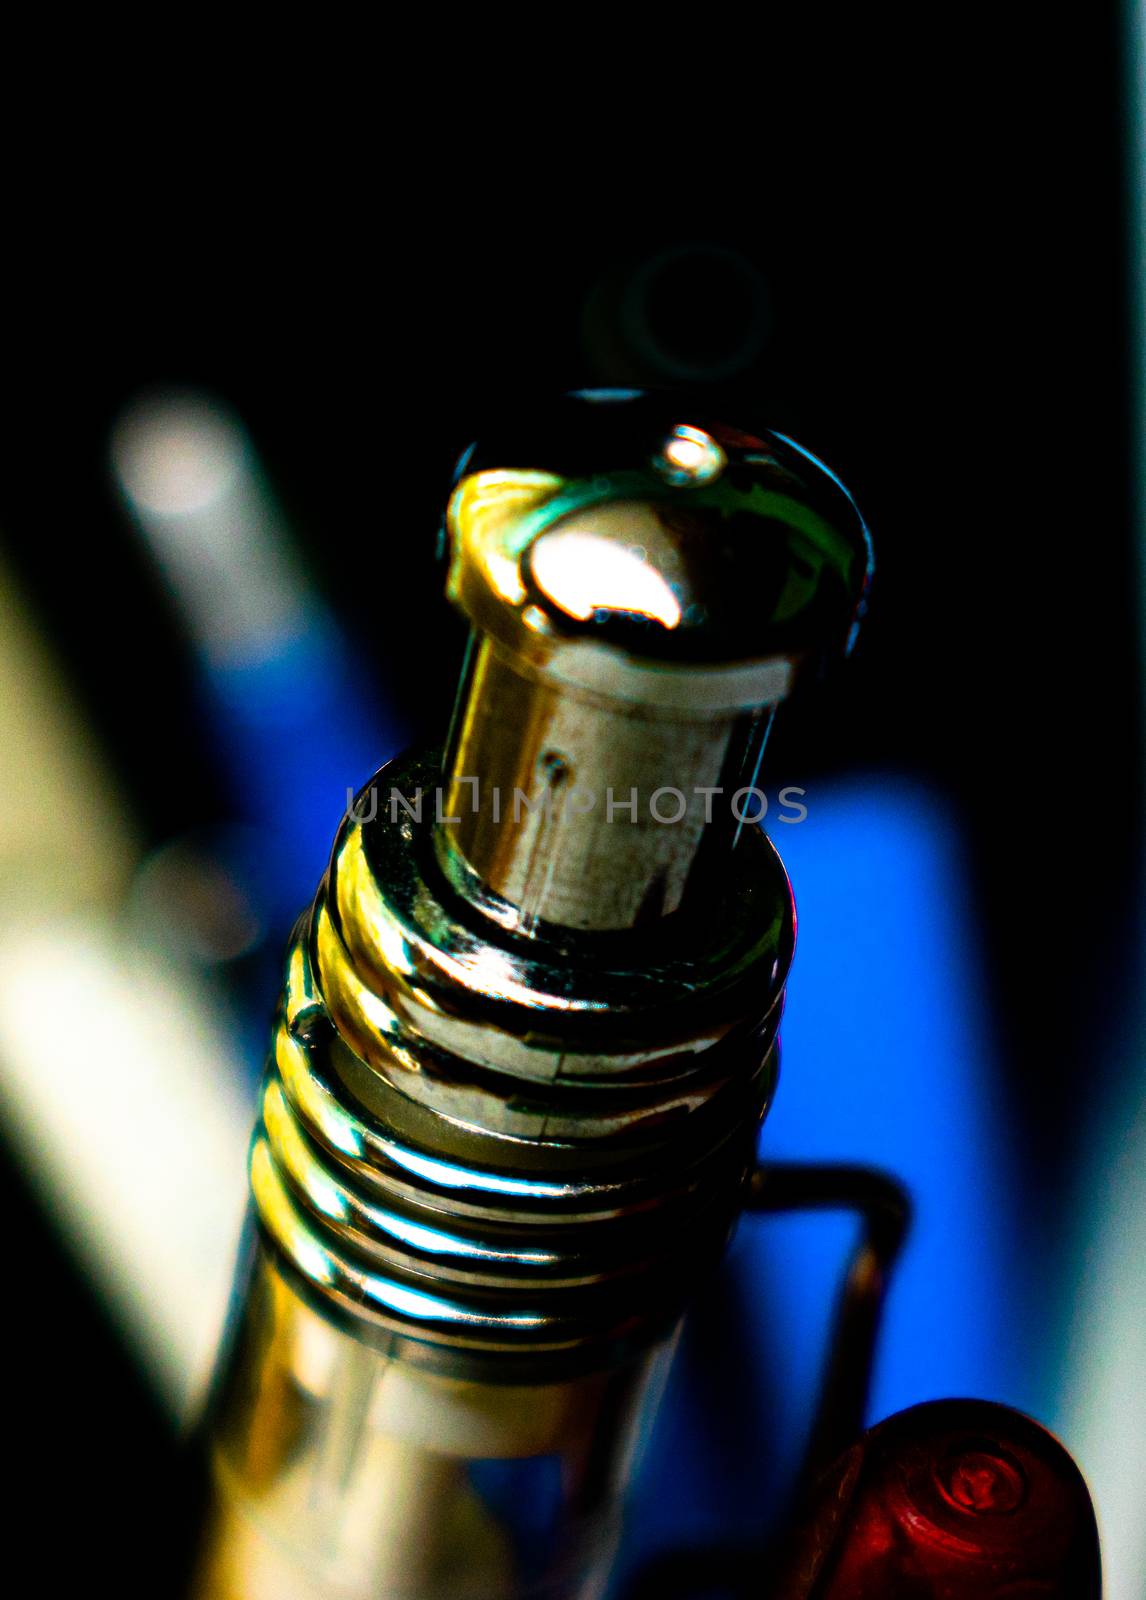 Macro photo of ballpoint pen (high contrast) - Business or writing themed.